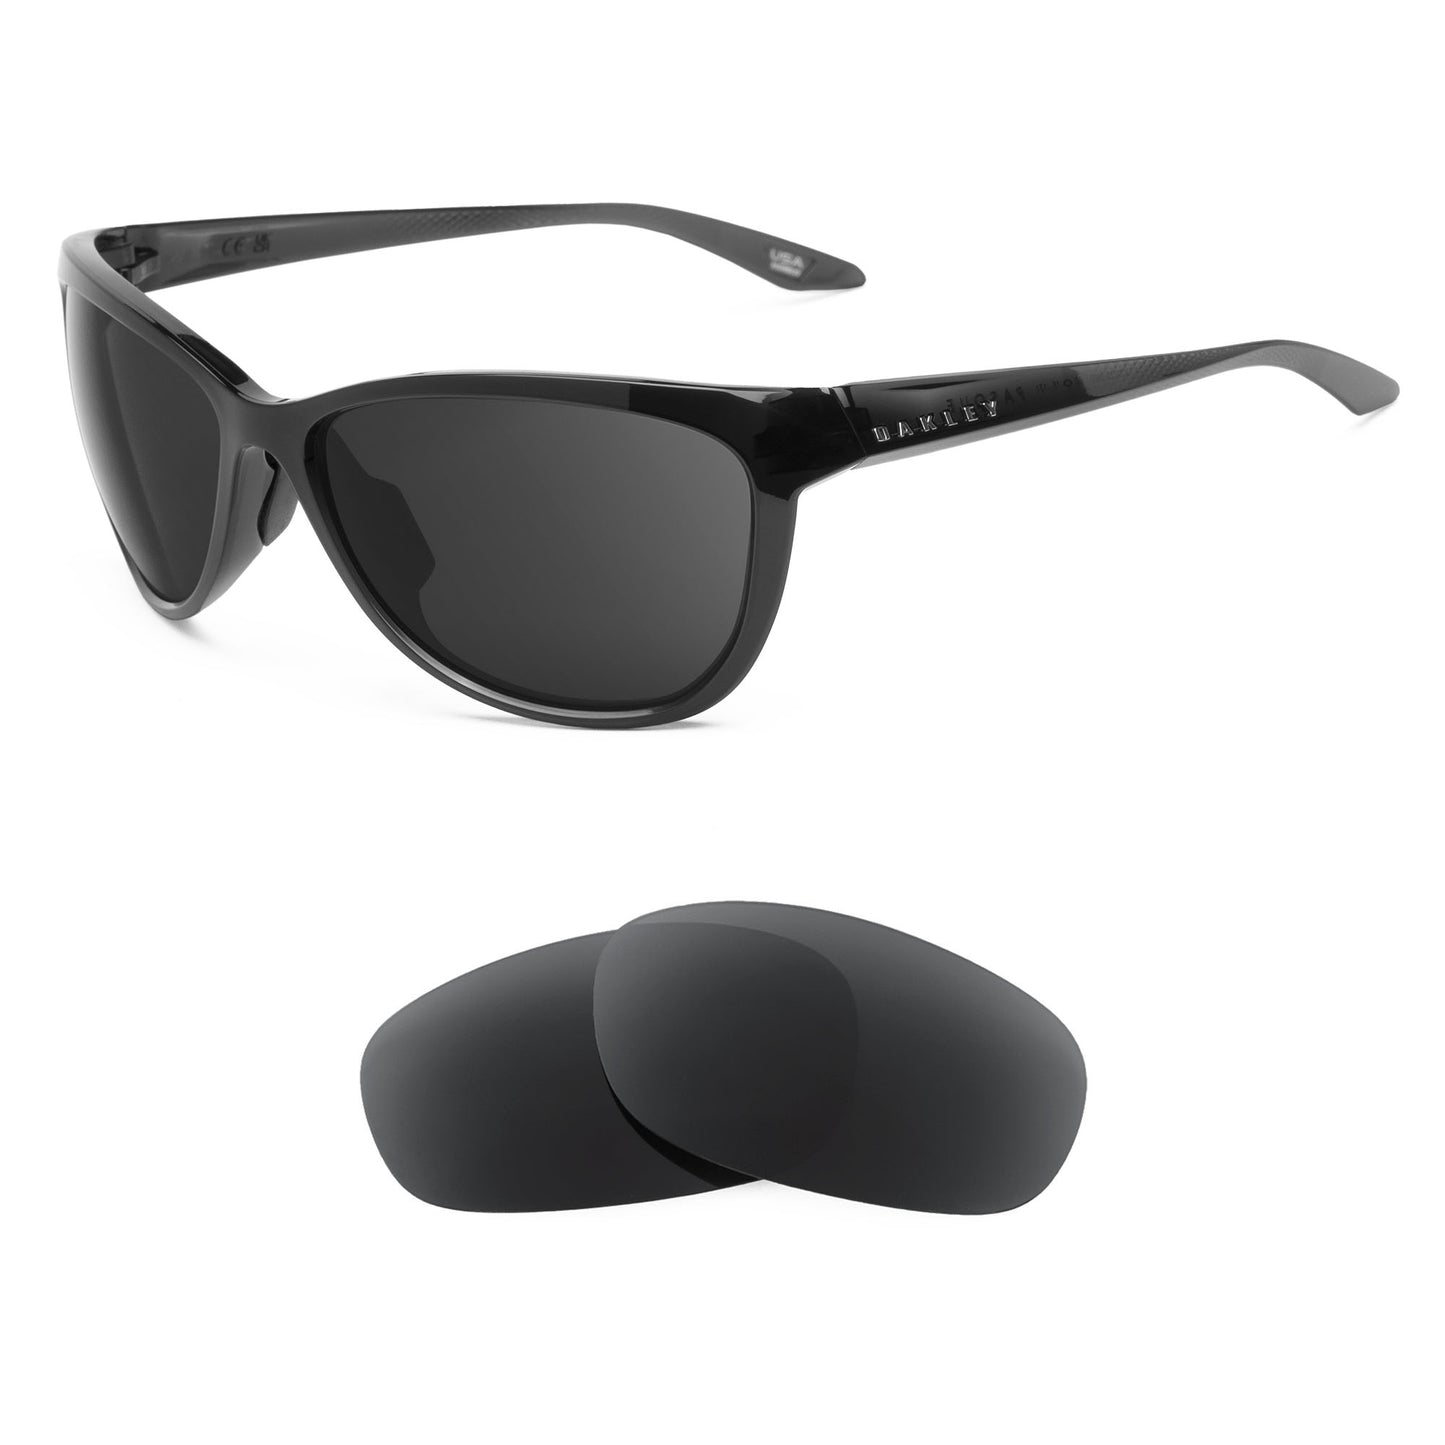 Oakley Pasque sunglasses with replacement lenses